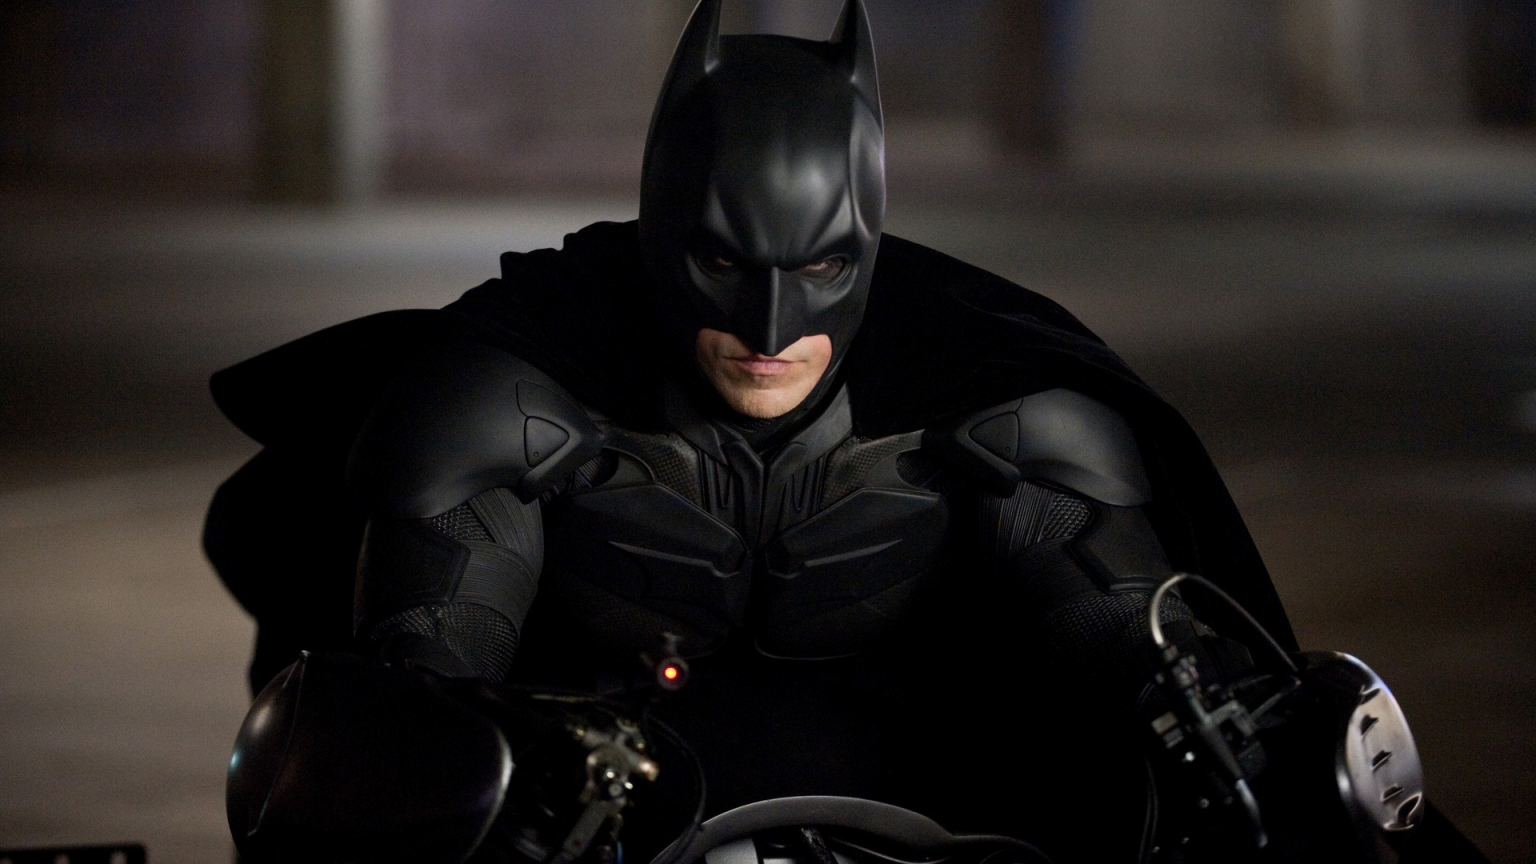 Angry Batman for 1536 x 864 HDTV resolution